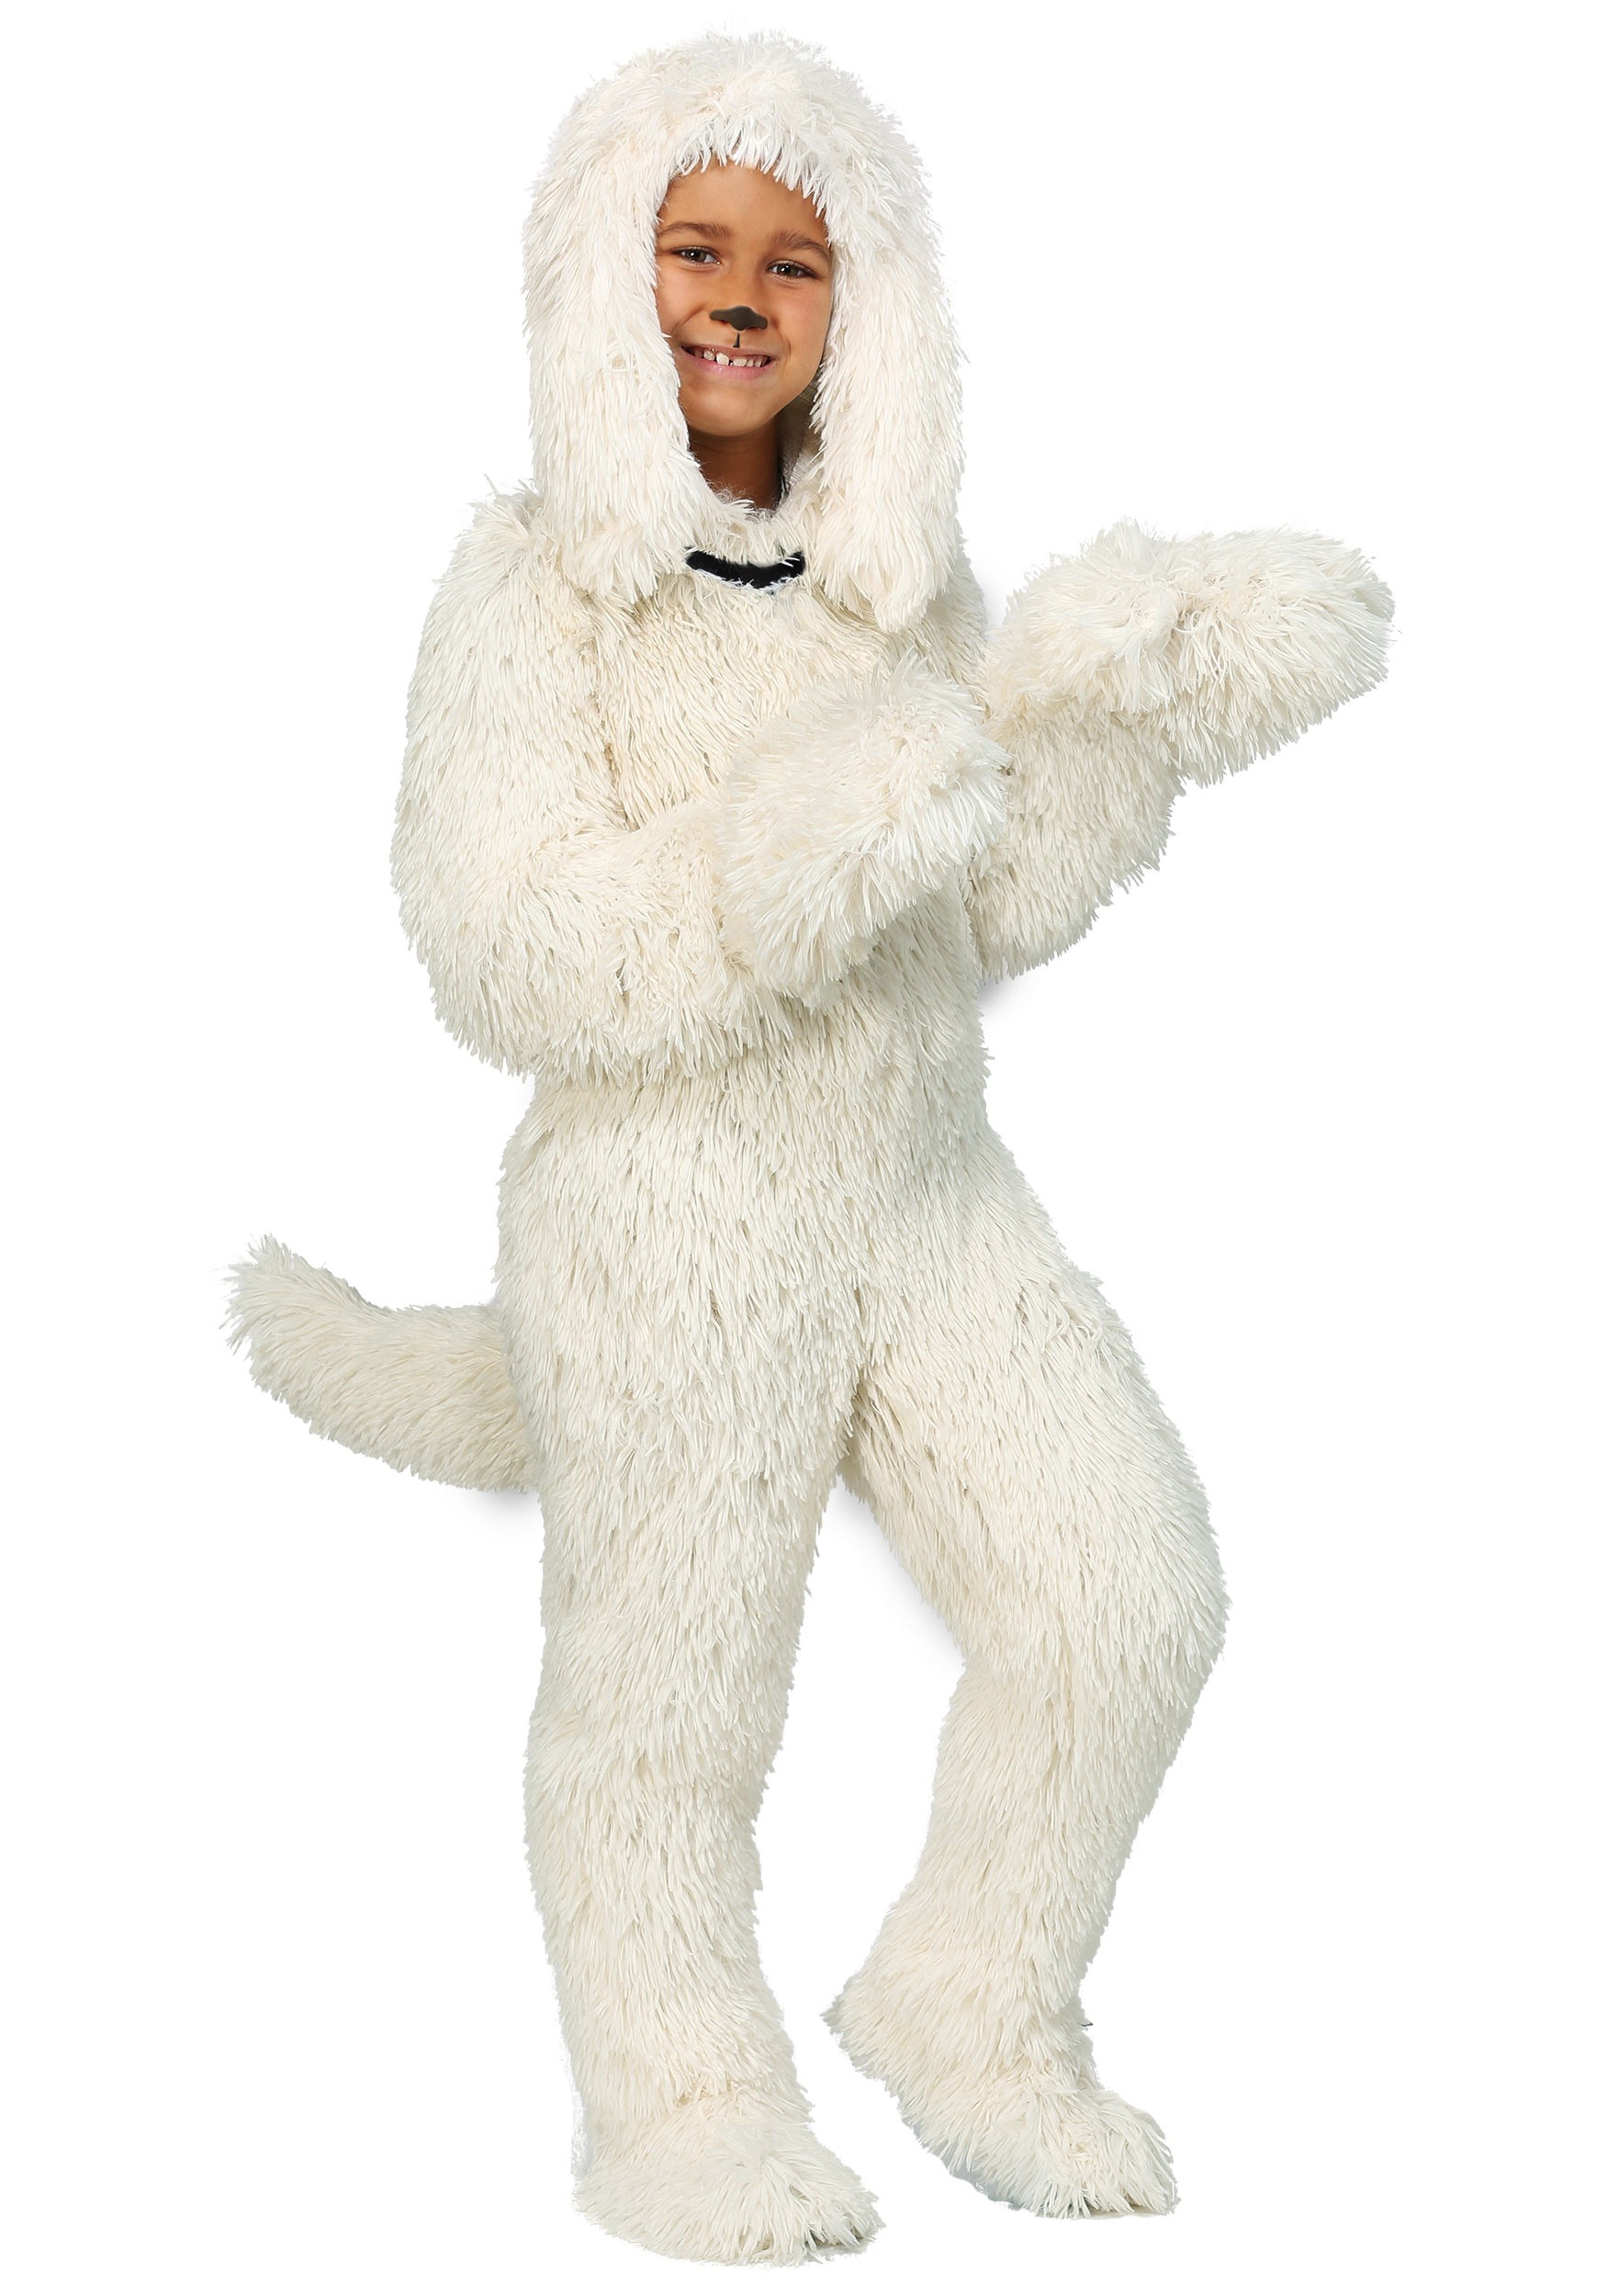 Shaggy Sheep Dog Costume For Kids , Exclusive , Made By Us